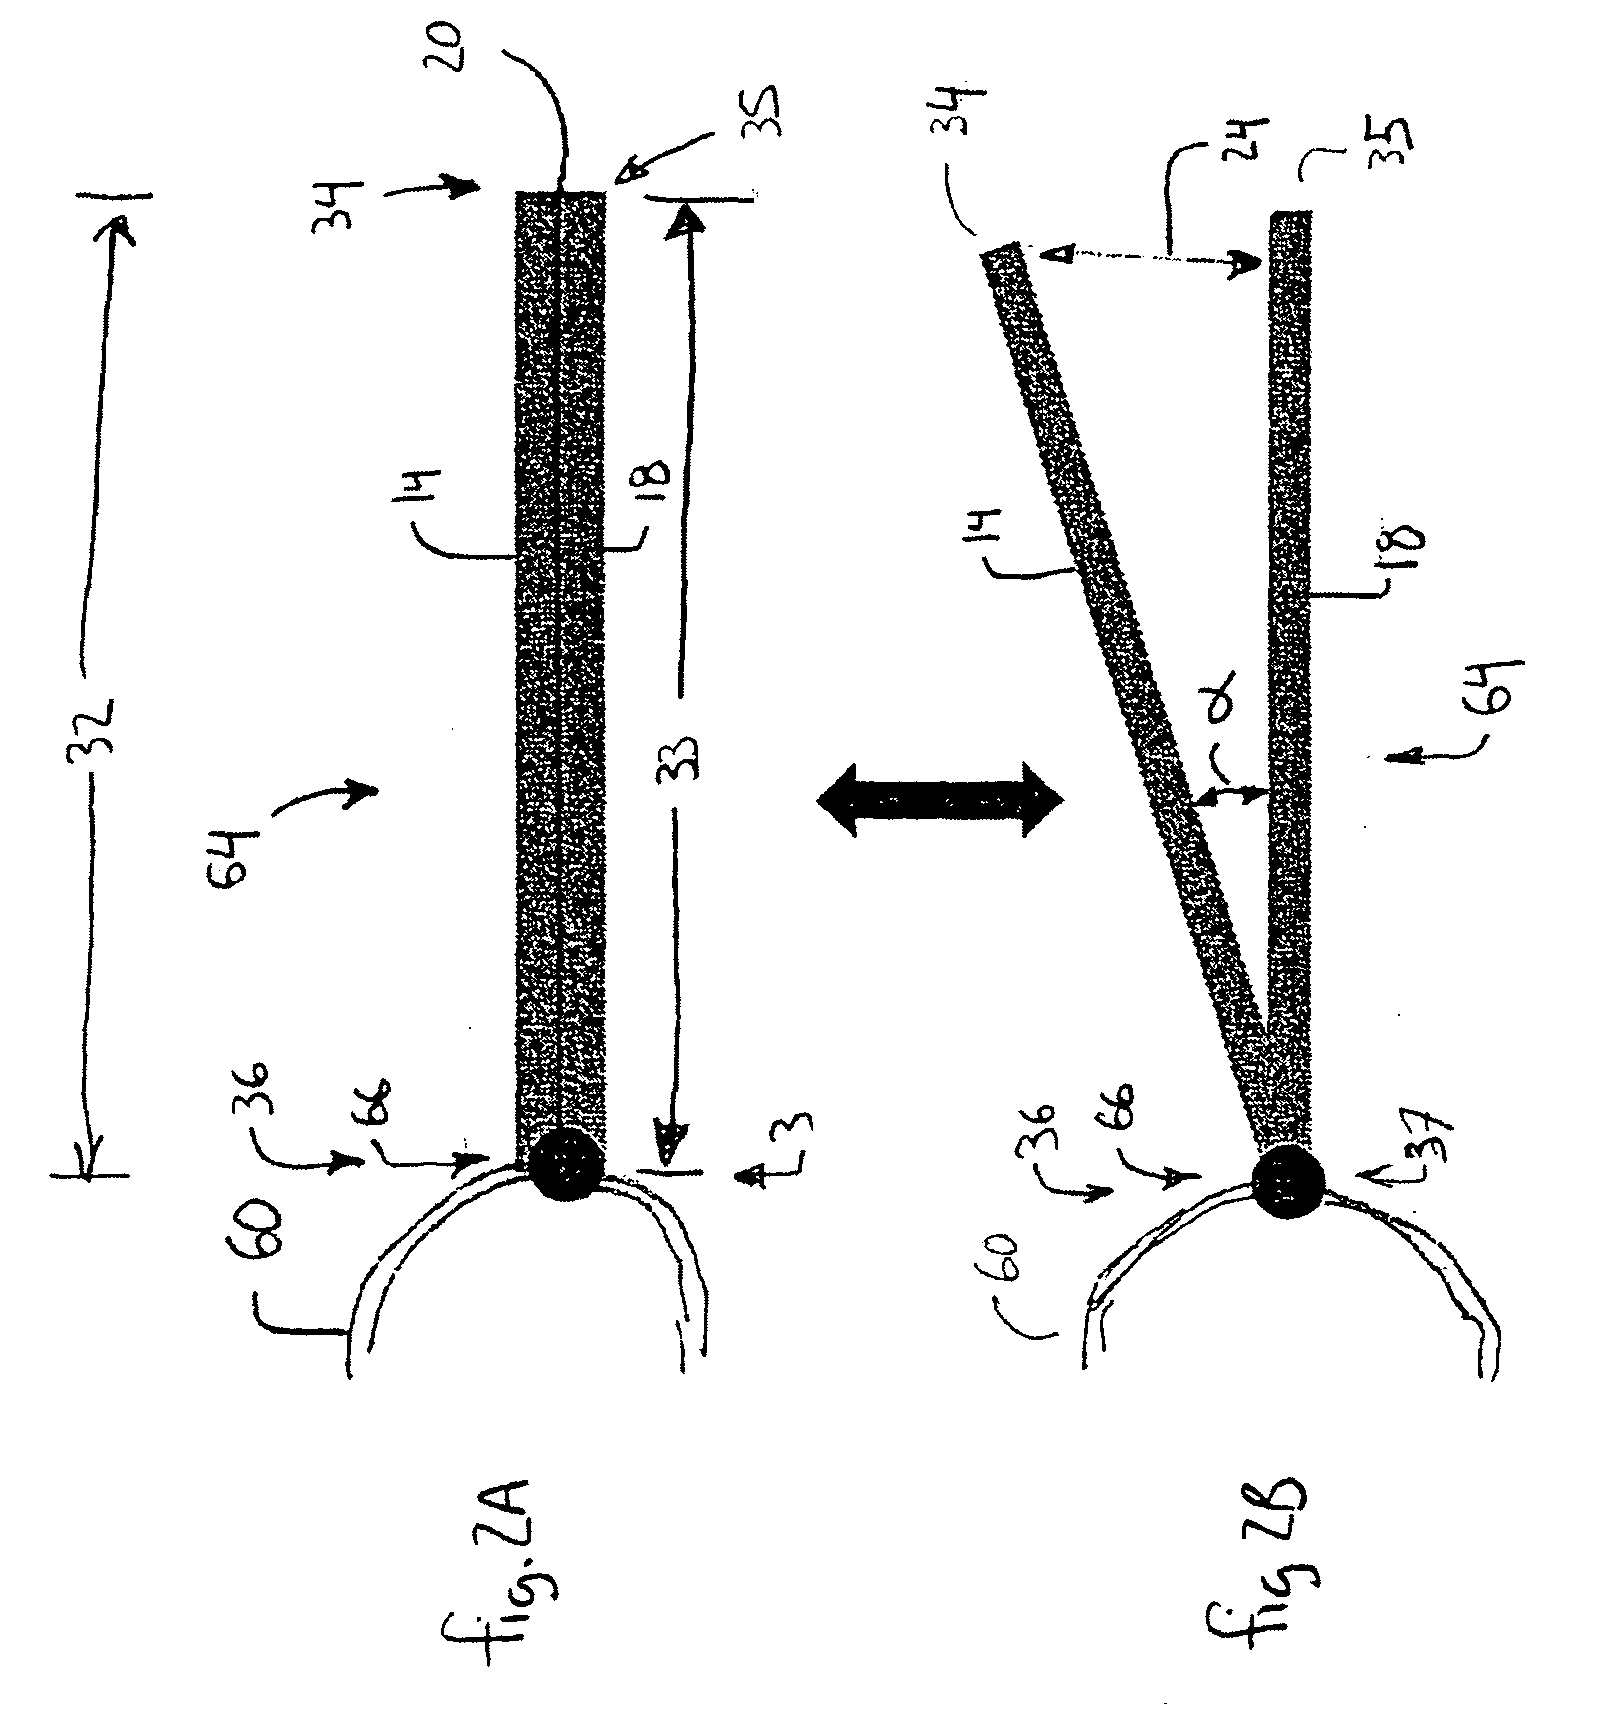 Apparatus for increase of aircraft lift and maneuverability